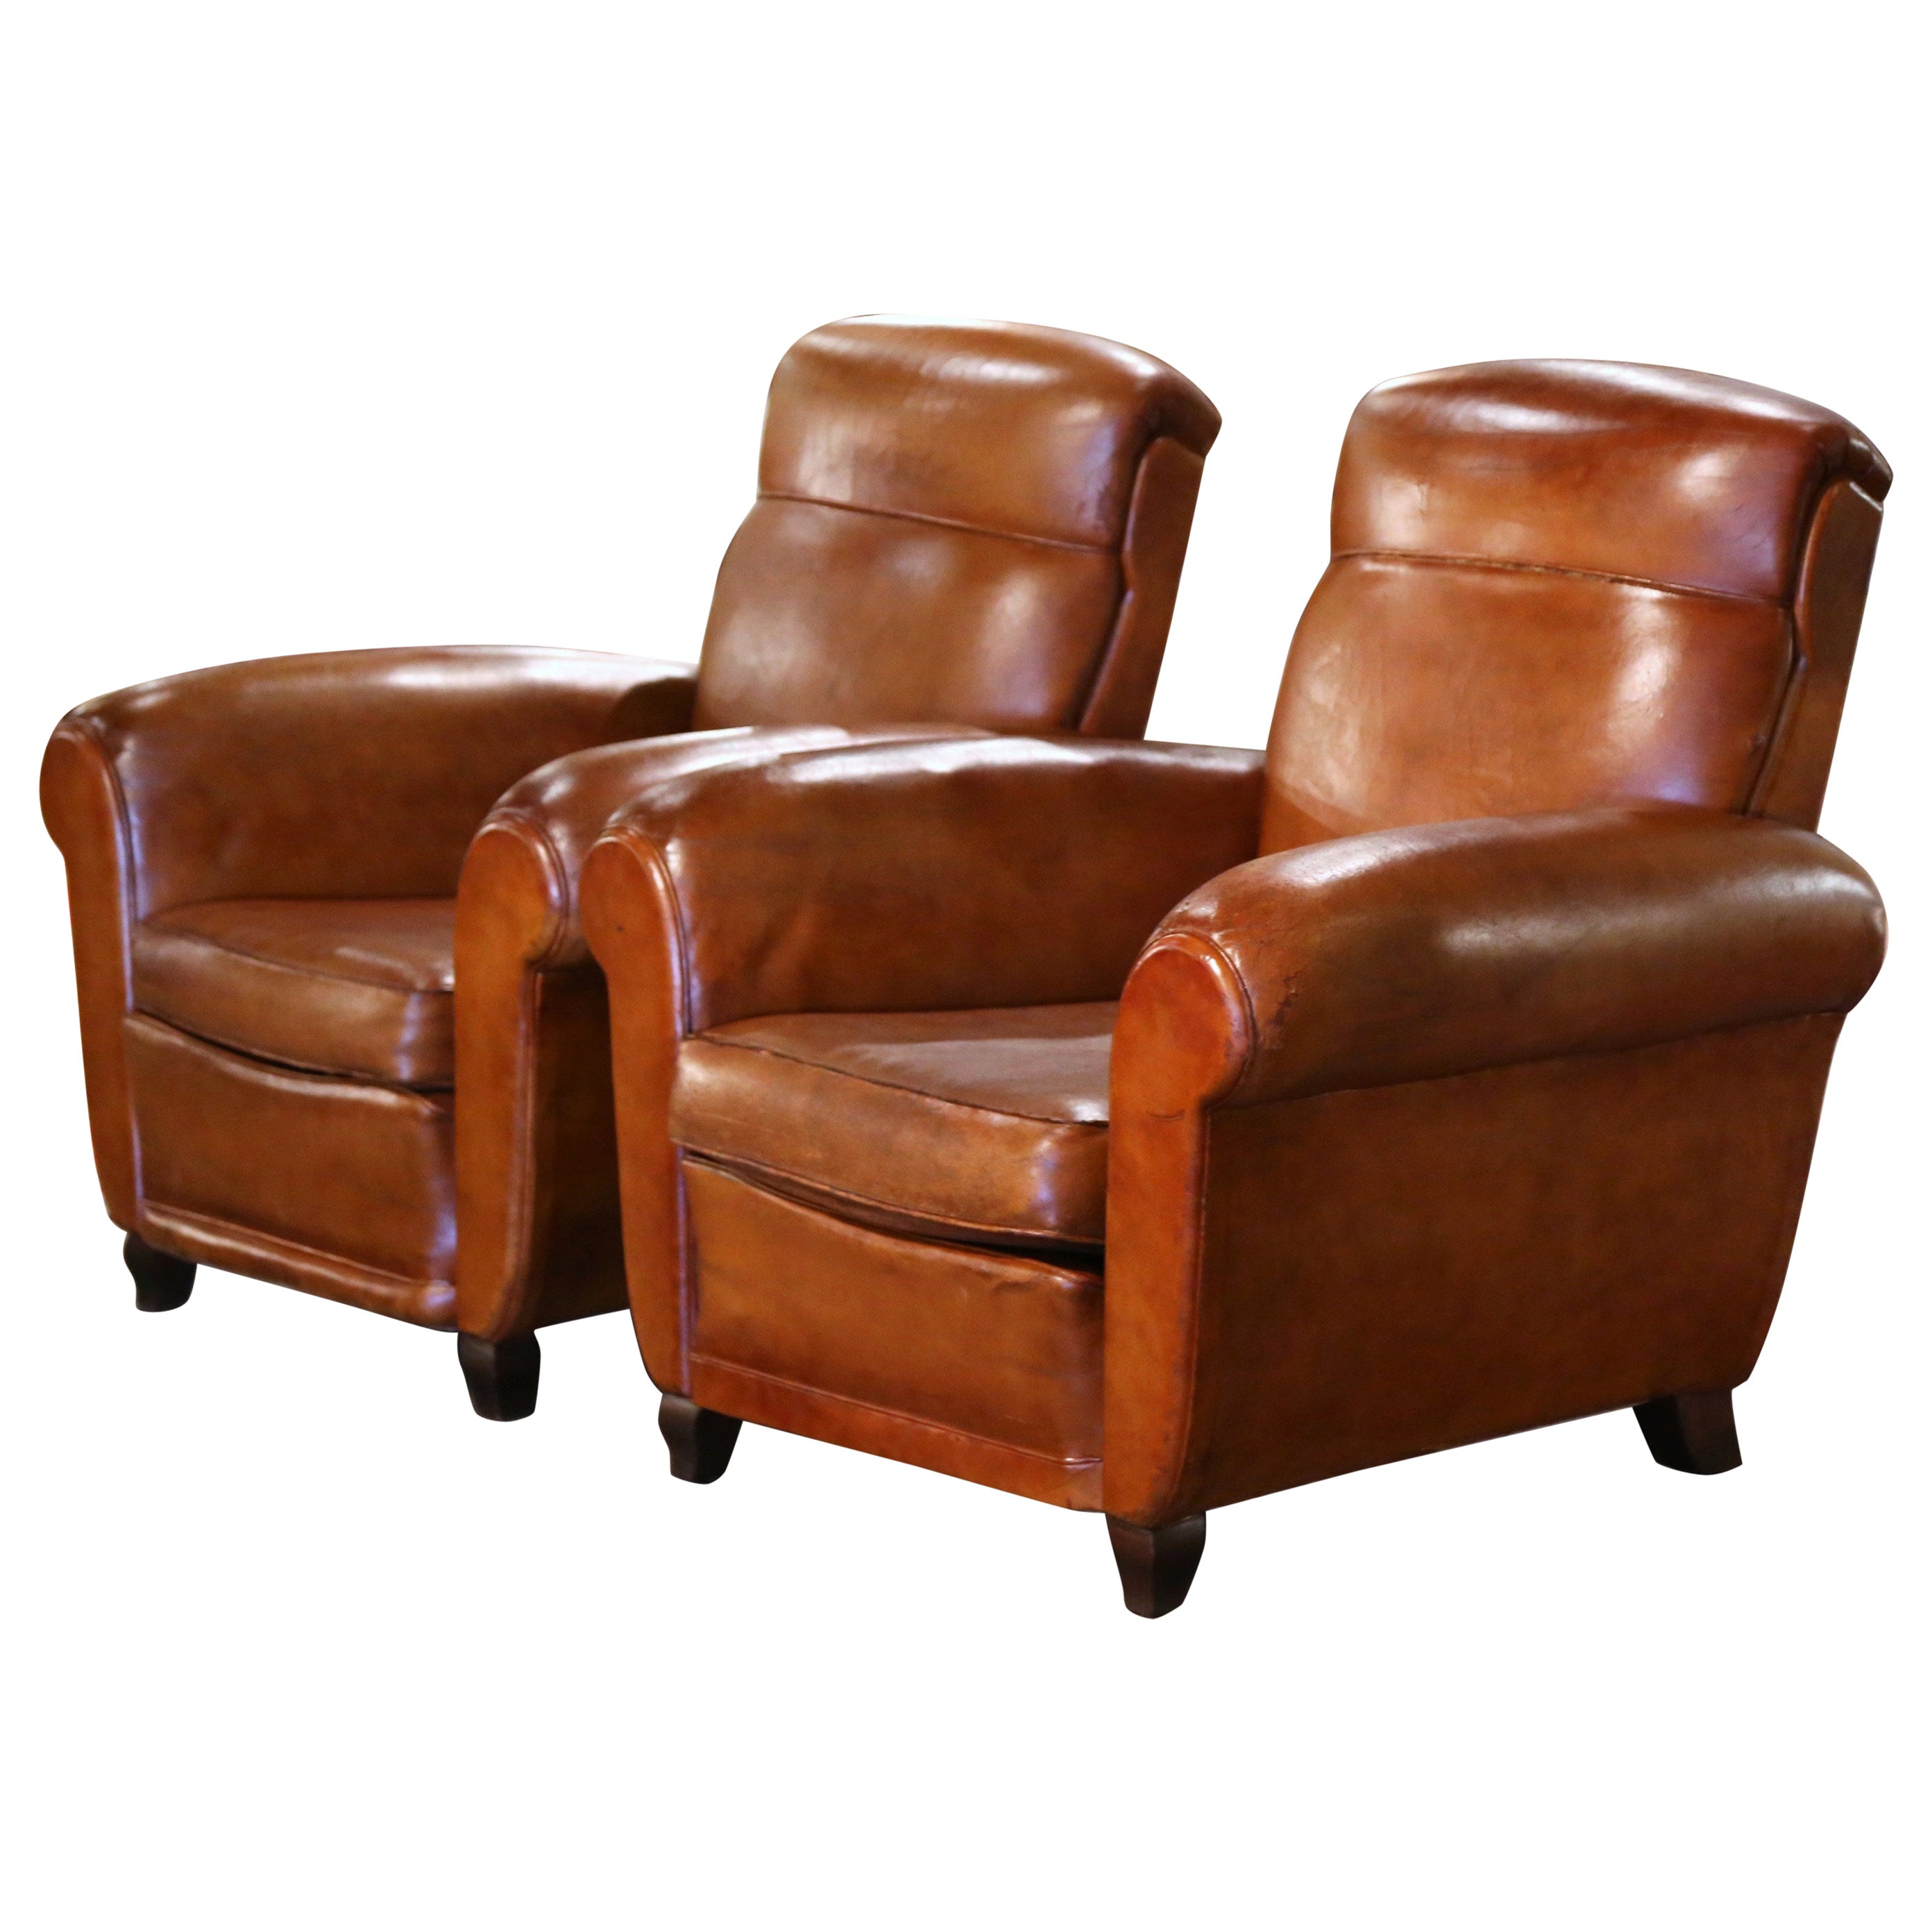 Pair of 1920s French Art Deco Club Armchairs with Original Brown Leather